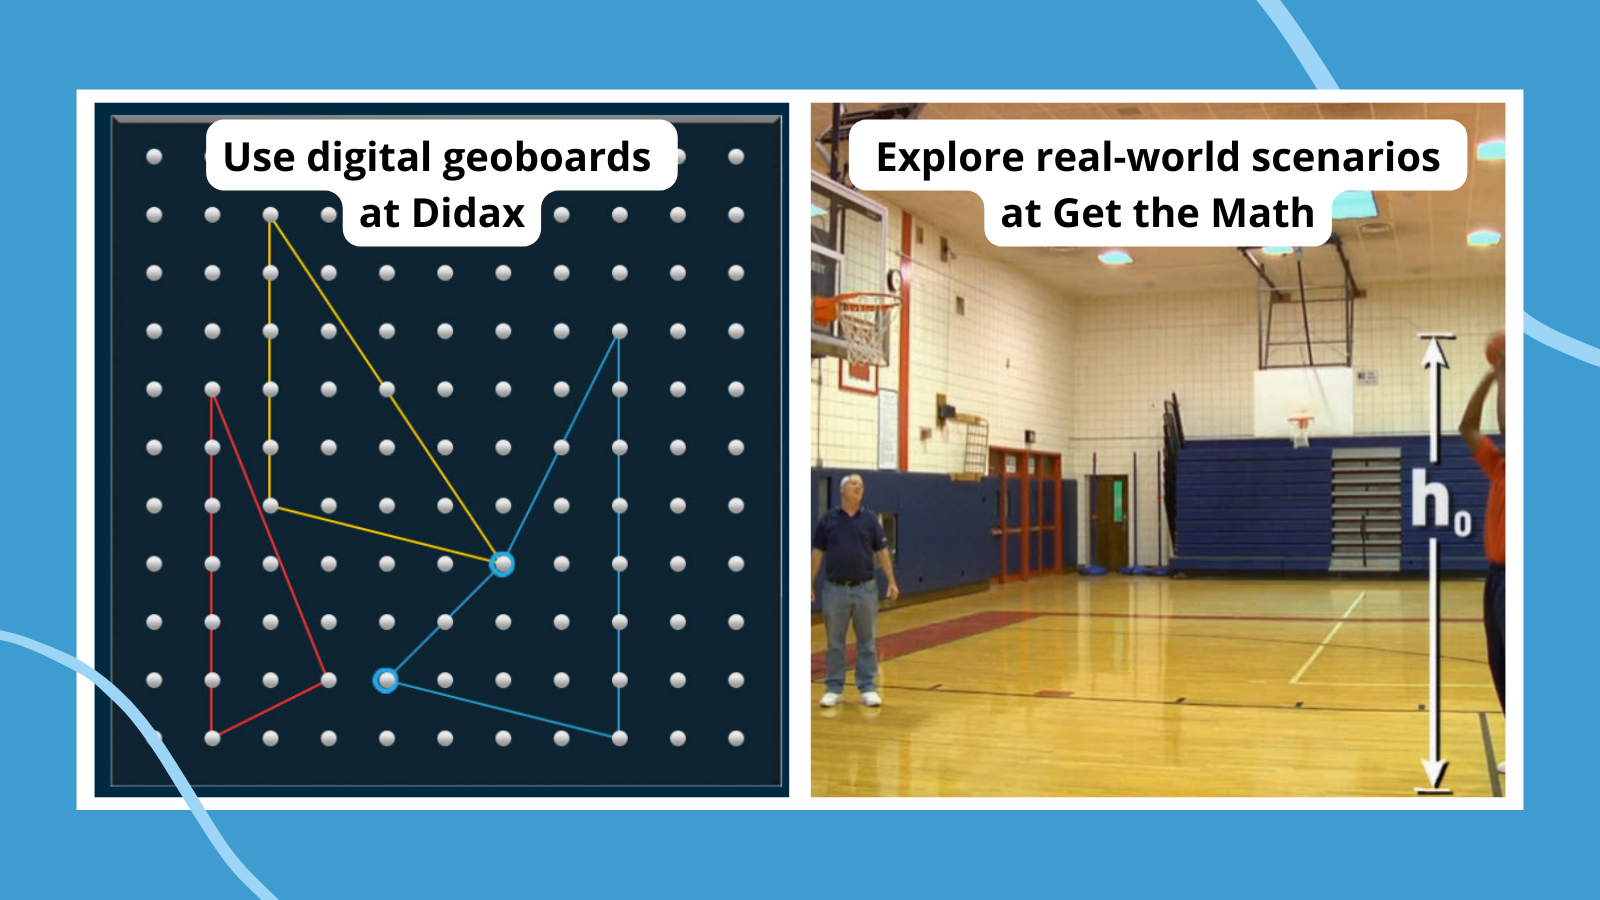 Collage of math websites, including an online geoboard from Didax and still from a basketball video at Get the Math